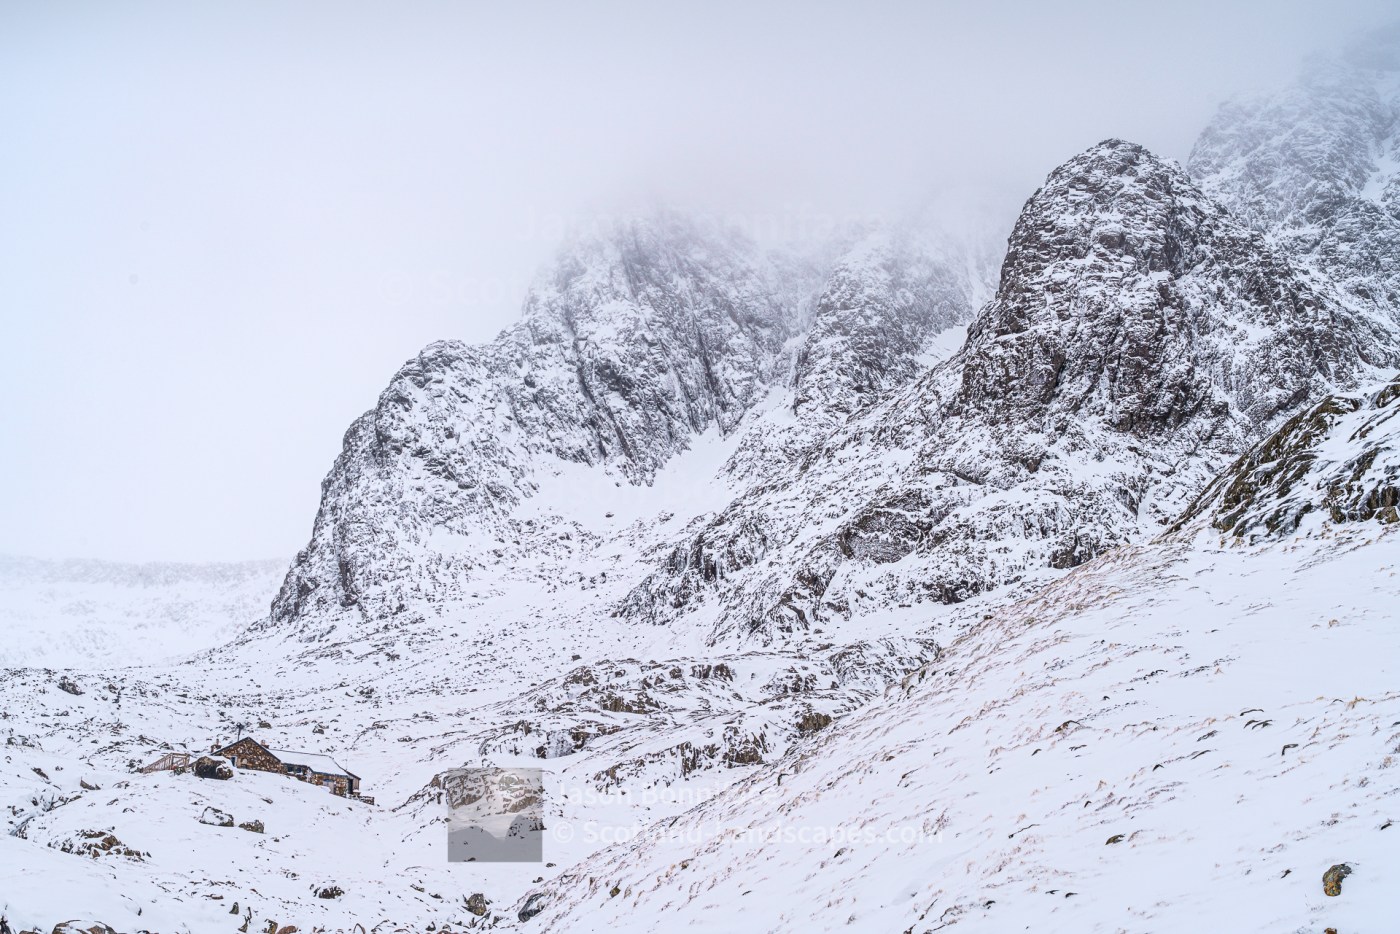 The CIC Hut and lower North Face of Ben Nevis - the North East Buttress, lower Observatory Ridge and Douglas Boulder visible, Fort William and Glencoe